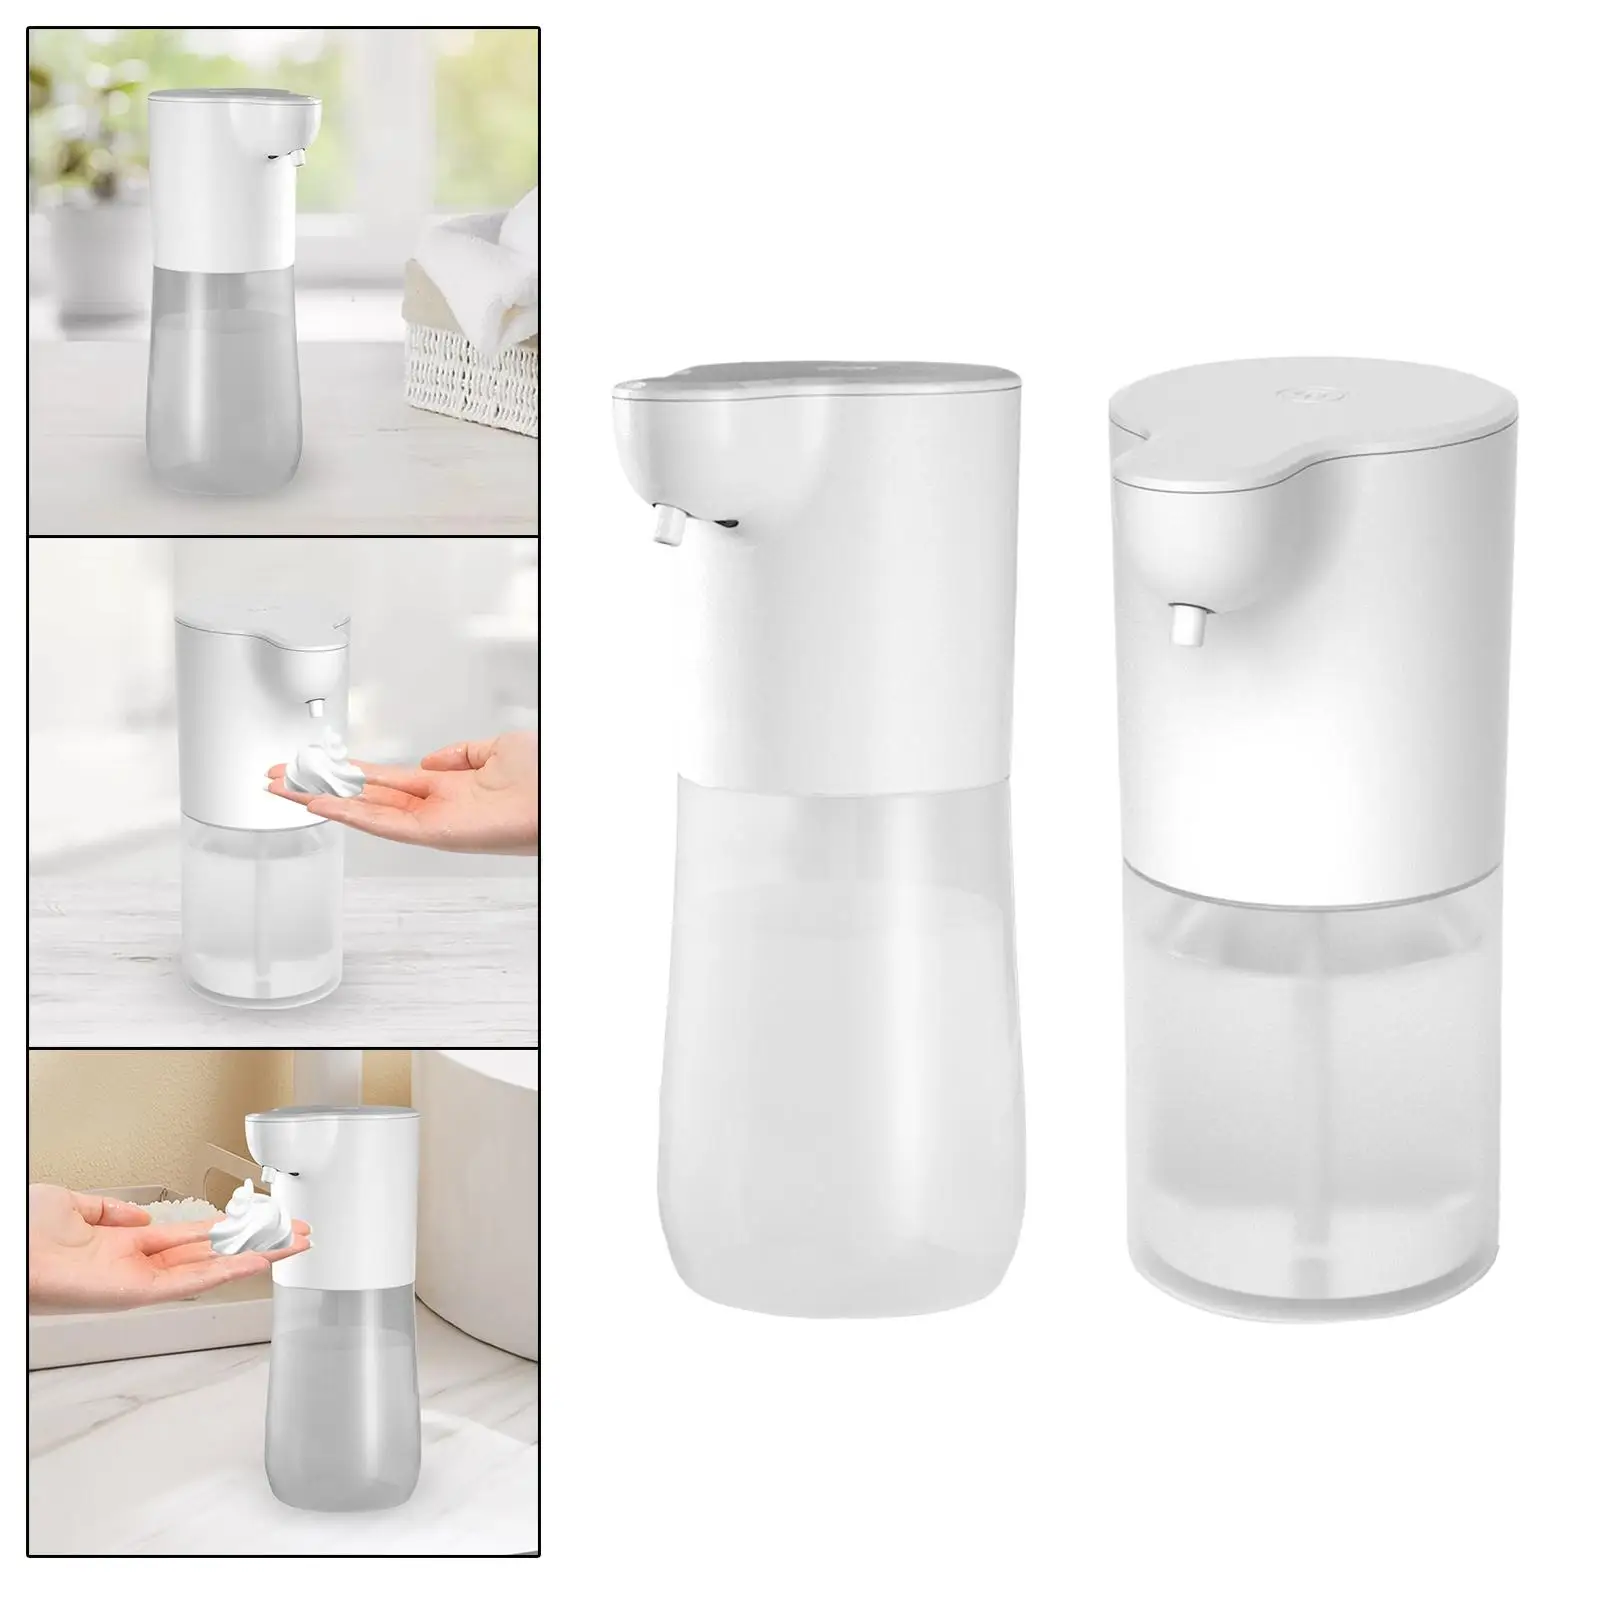 Fast Induction Automatic Liquid Soap Dispenser Hand Washing Machine Touchless Touchless Soap Dispensers for Kitchen Preschool